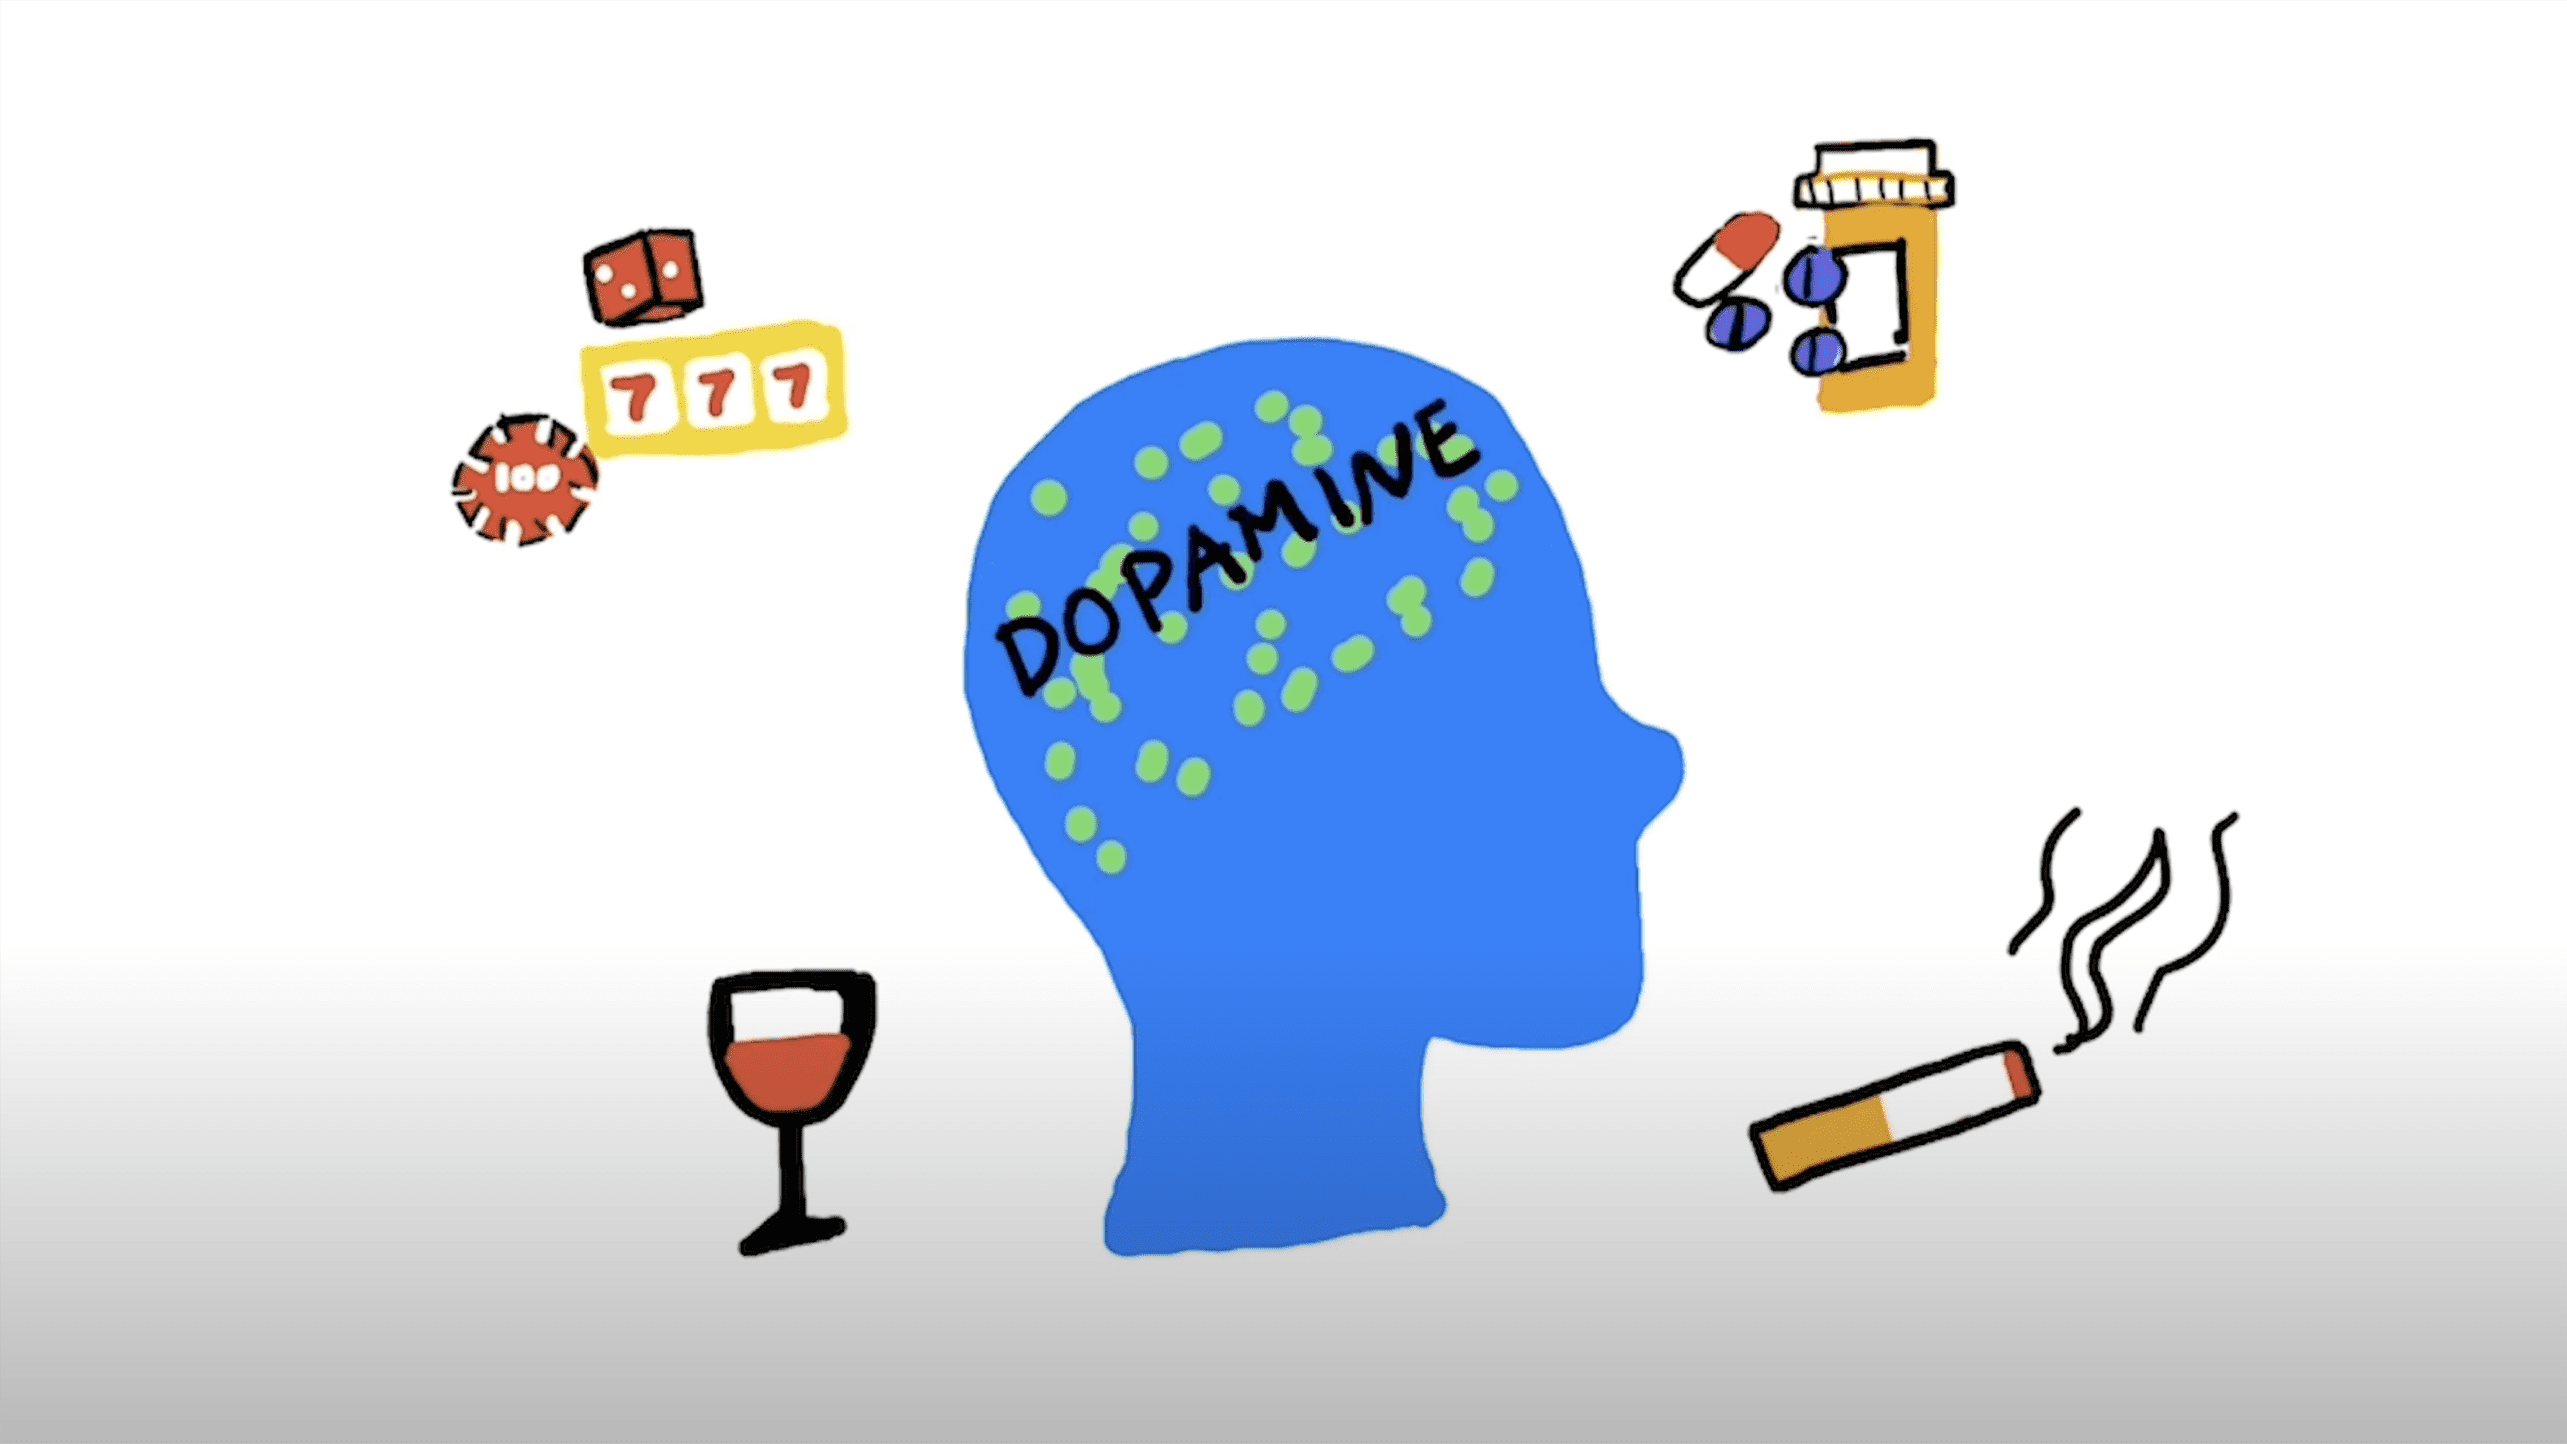 An illustration of a human head with the word "dopamine" written inside it with various addictive substances encircling the head including a cigarette, gambling chips, a glass of wine, and pills.